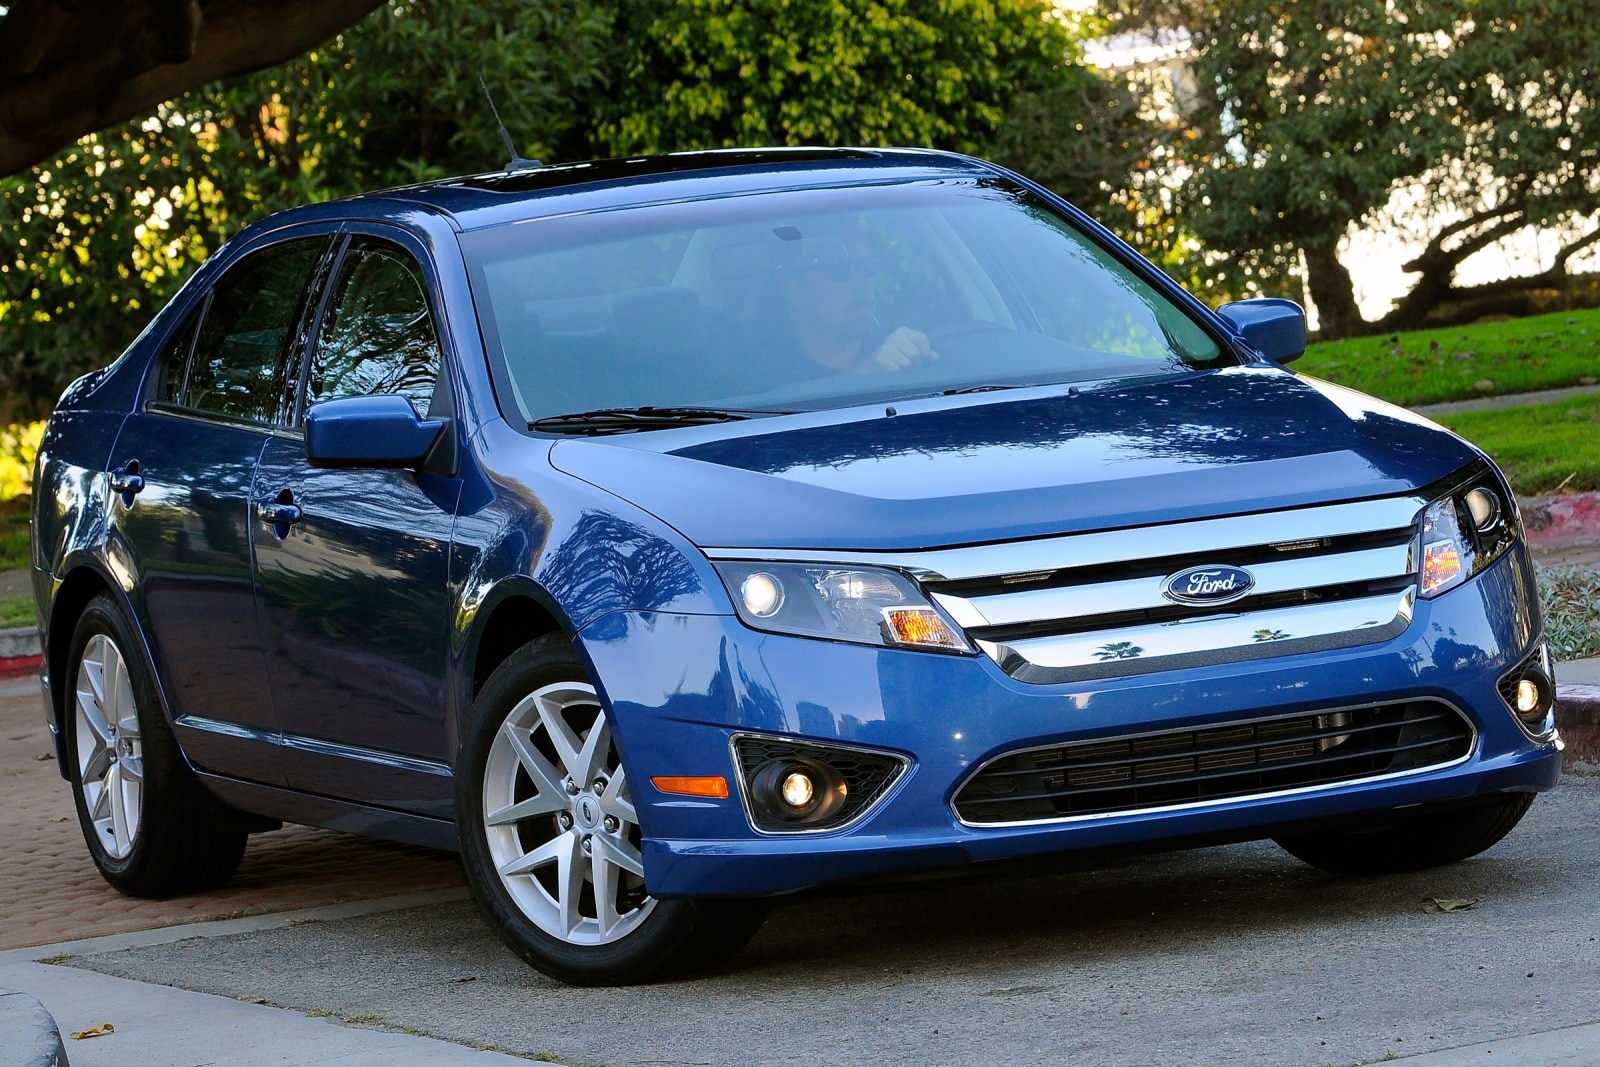 2010 Ford Fusion Review & Ratings | Edmunds